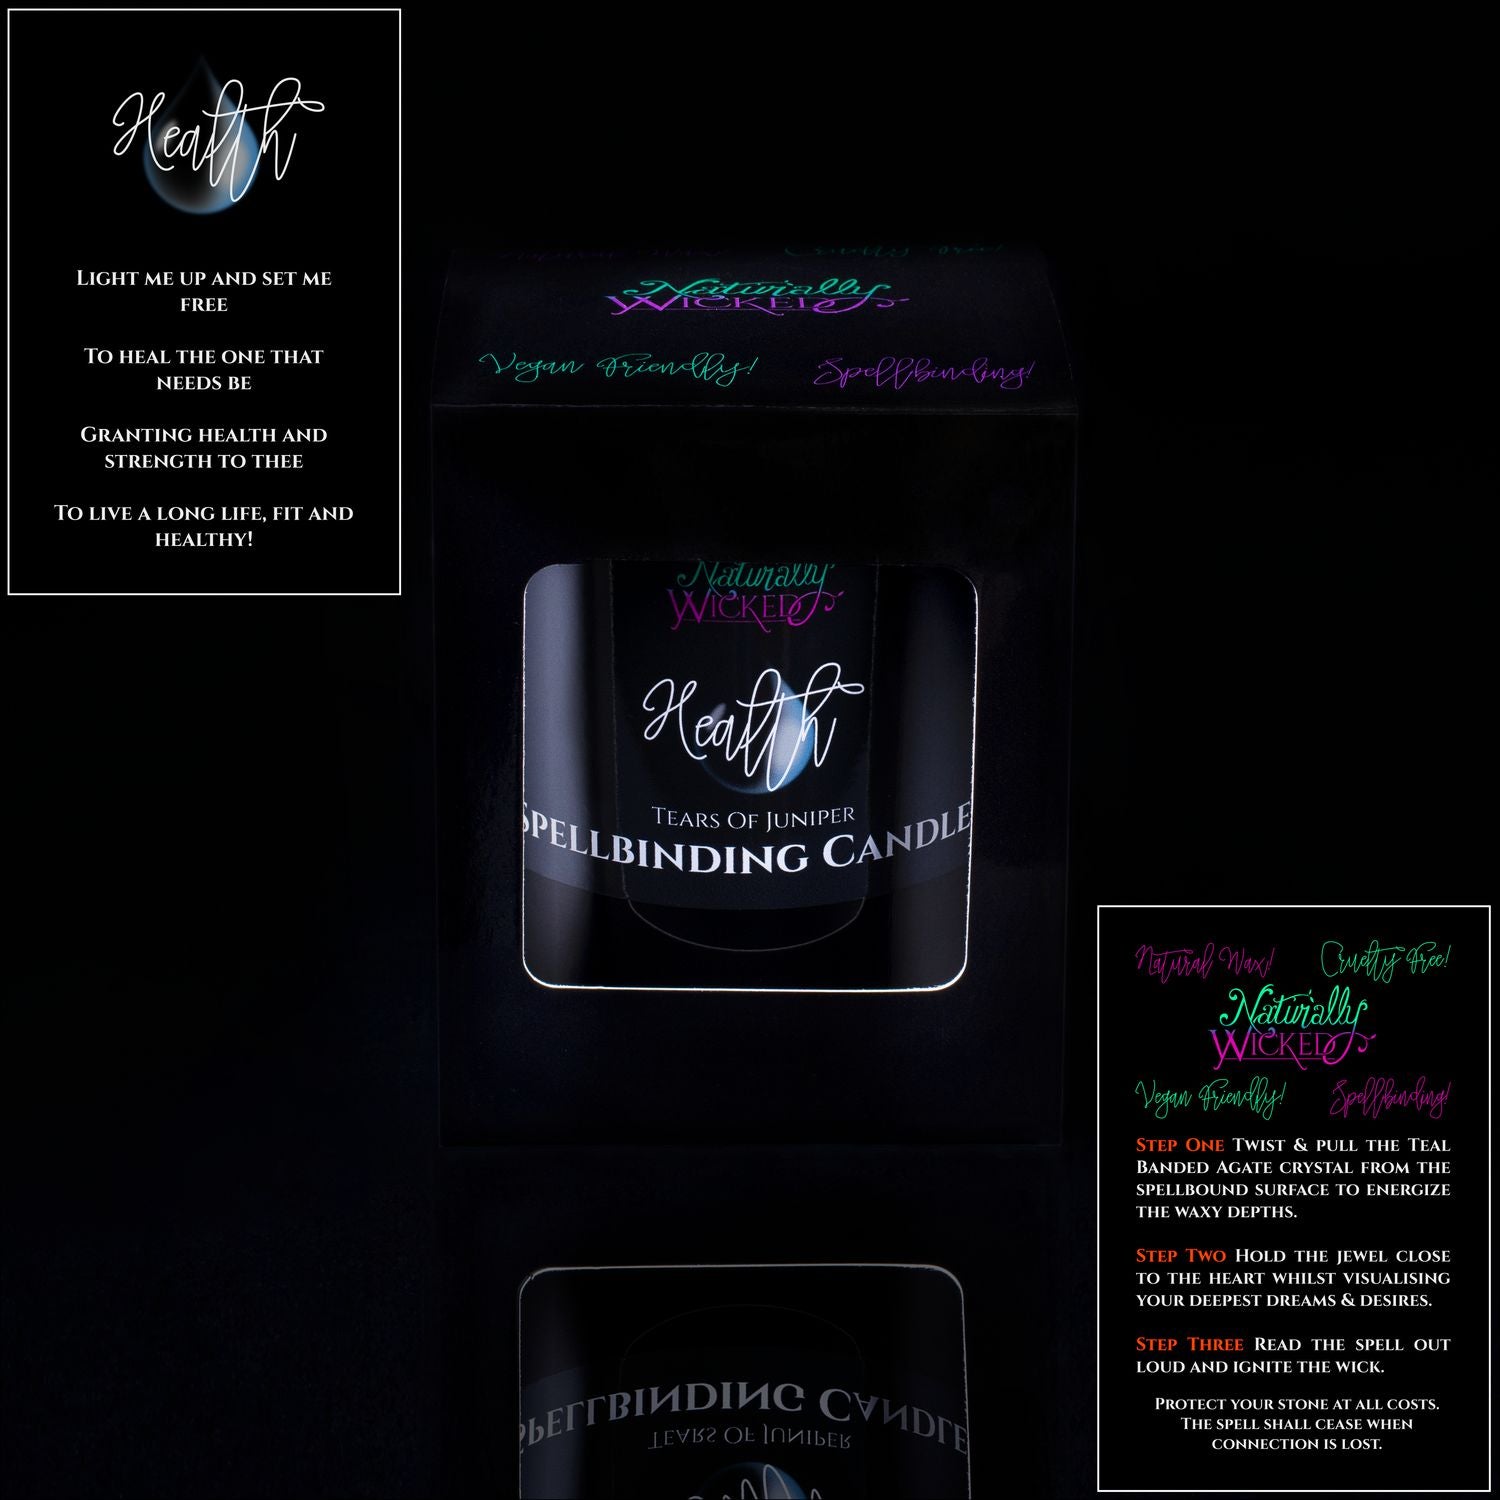 Cast The Perfect Spell With This Unique Spell Candle, Complete With A Double Sided Spell Card. Naturally Wicked Spellbinding Health Candle Displayed In A Sleek Black Gloss Gift Box. The Candle Features Plant-Based Smooth Blue Wax, A Wood Wick And A Beautiful Teal Banded Agate Crystal. Give The Gift Of Health.